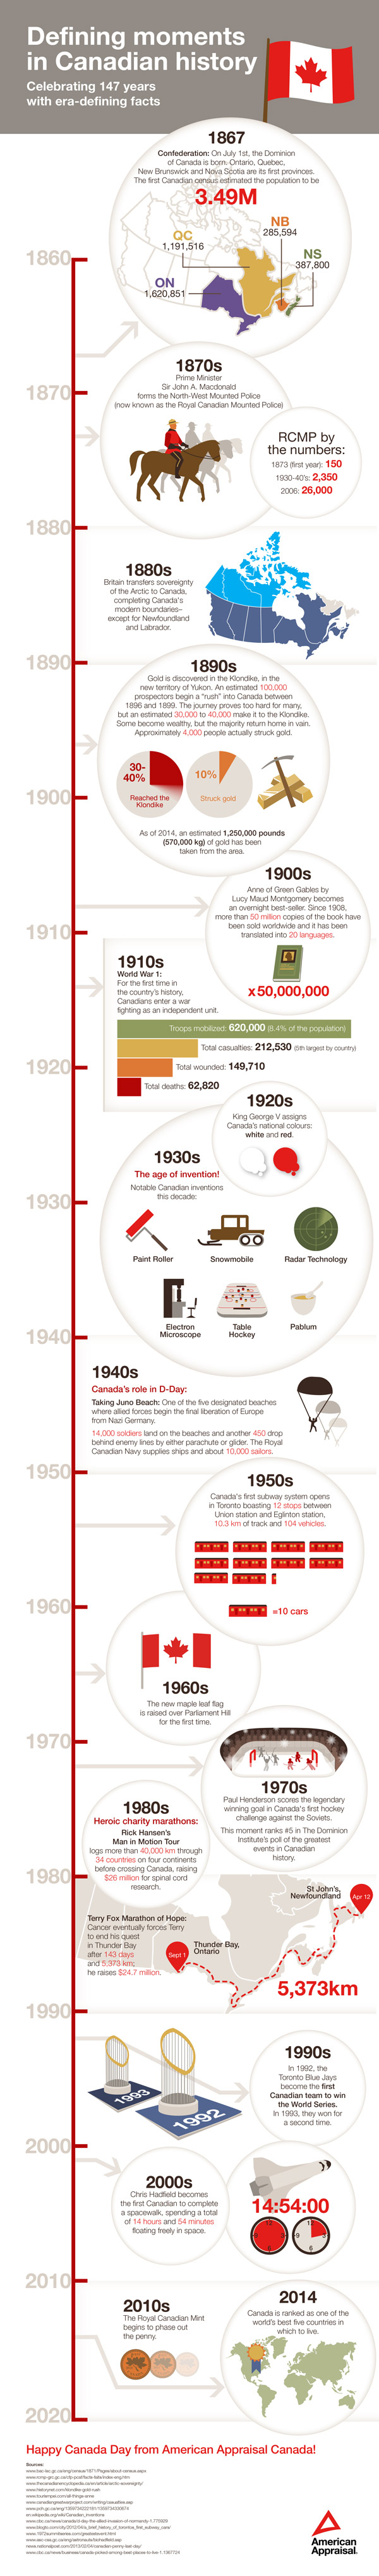 Defining Moments in Canadian History infographic